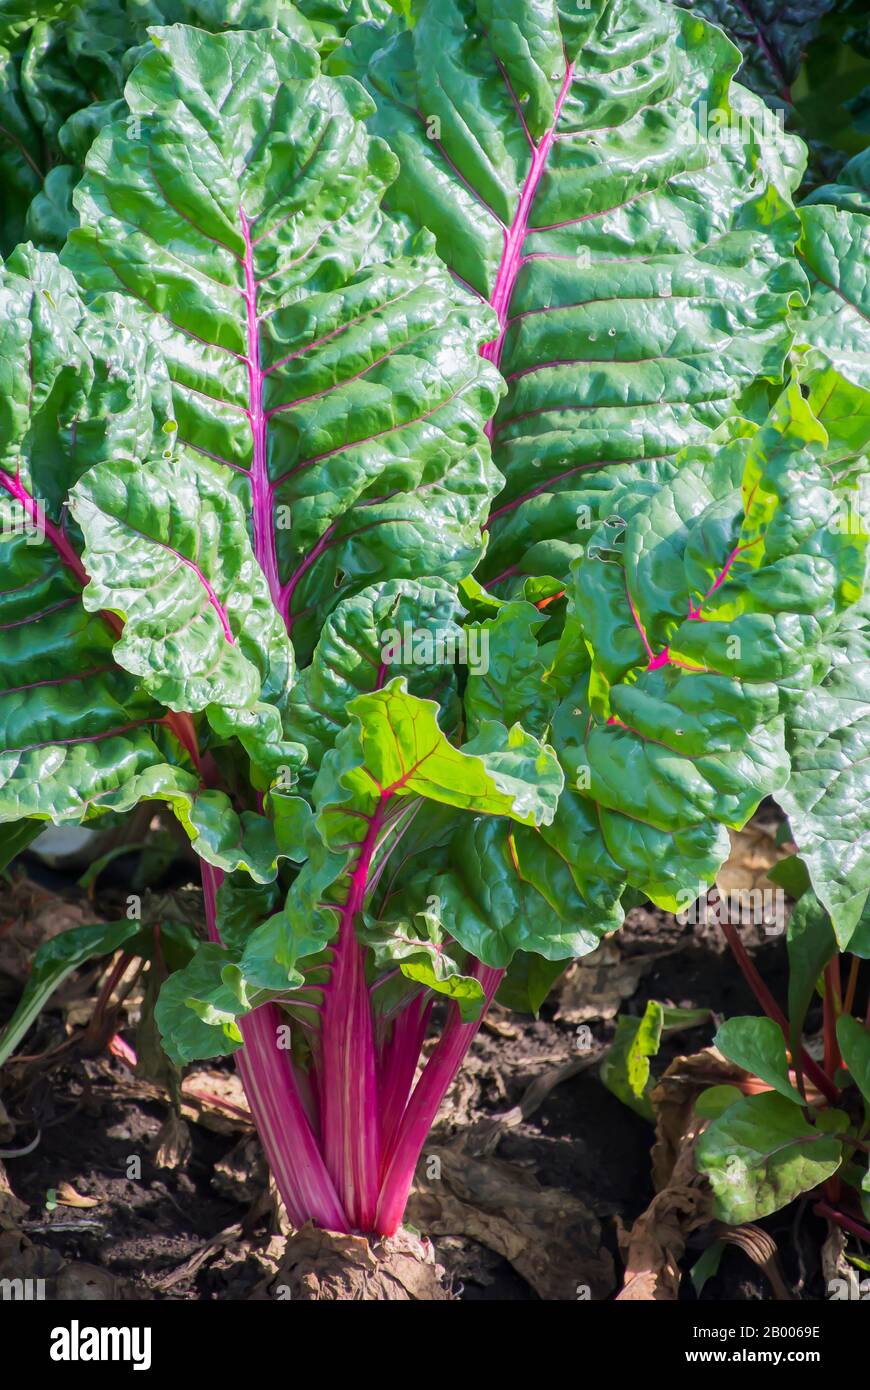 Chard Growing in Field Stock Photo